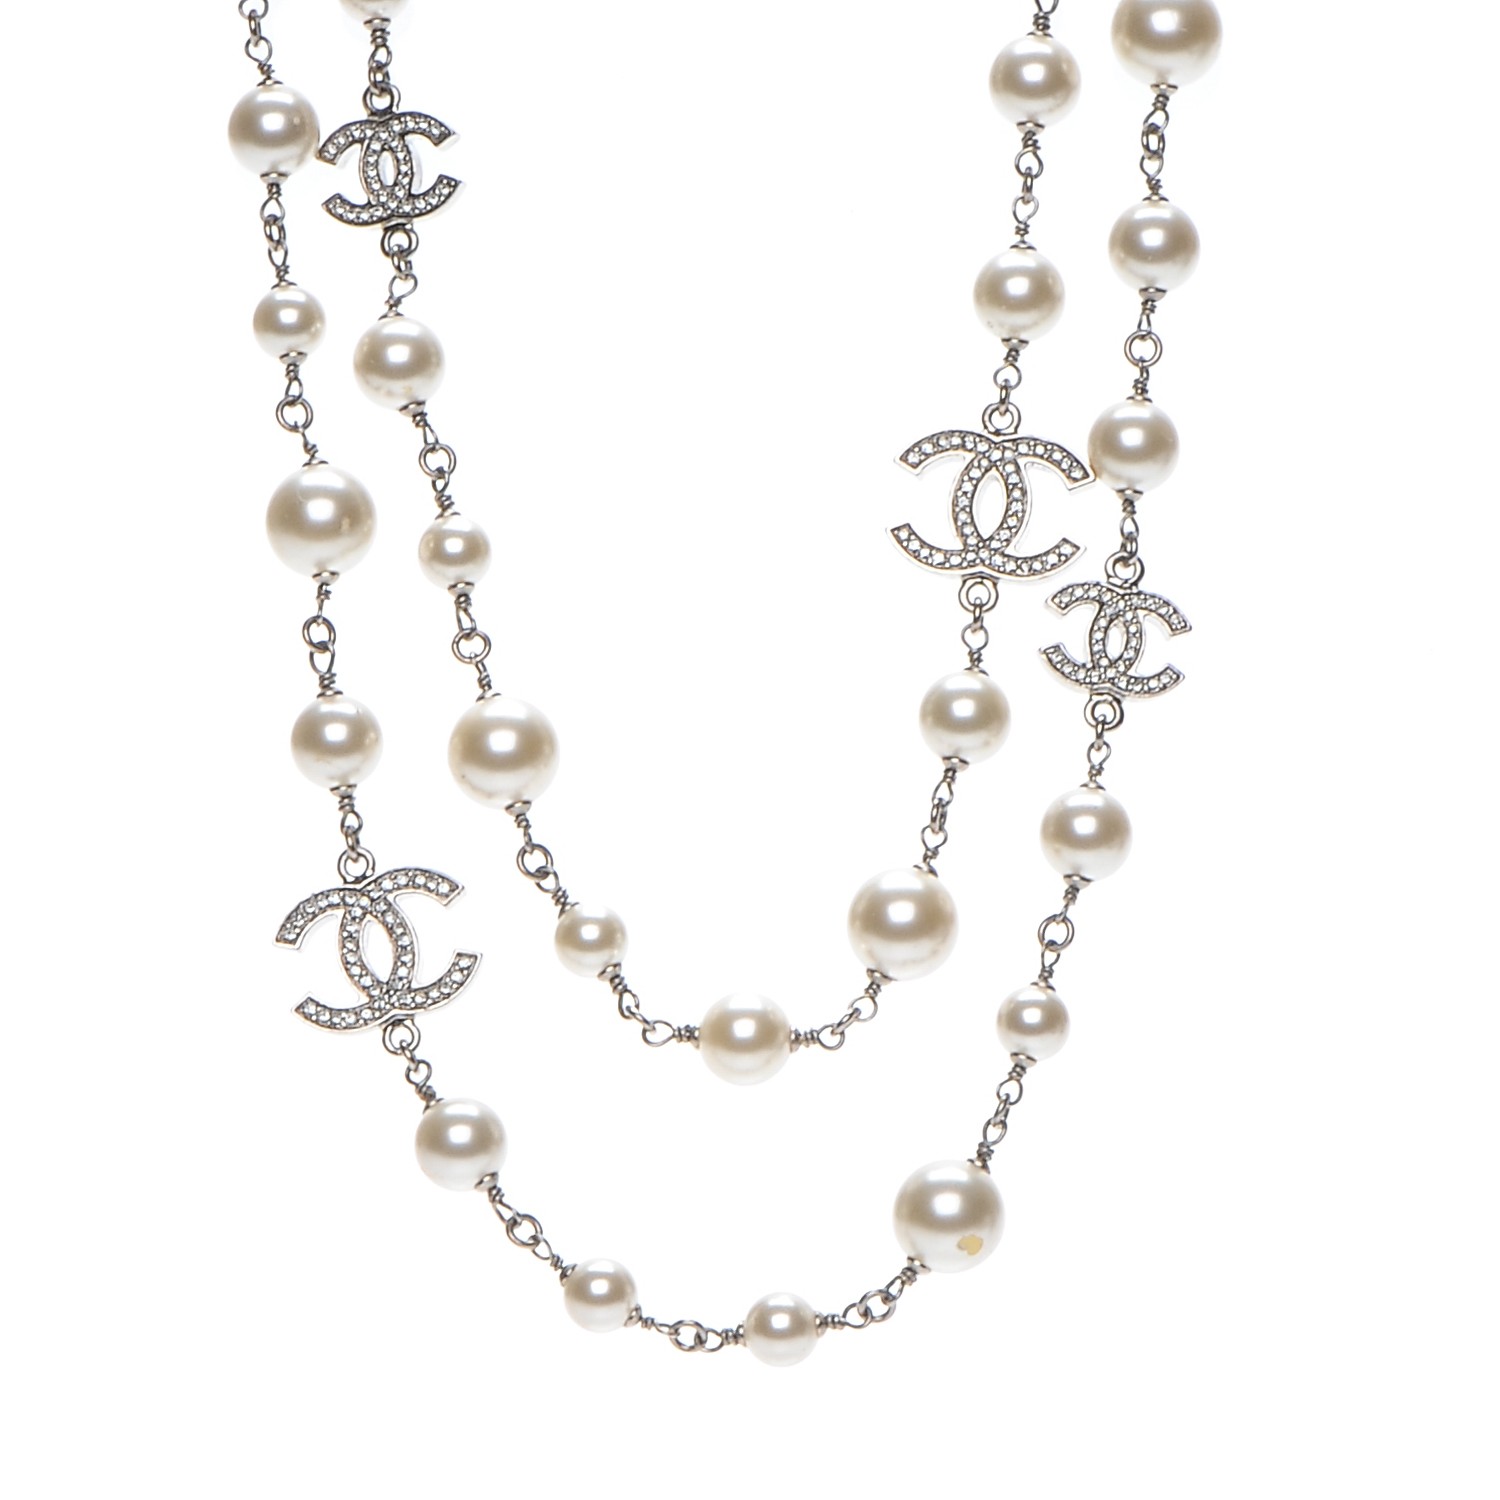 CHANEL Crystal Pearl CC Long Necklace Silver 198898